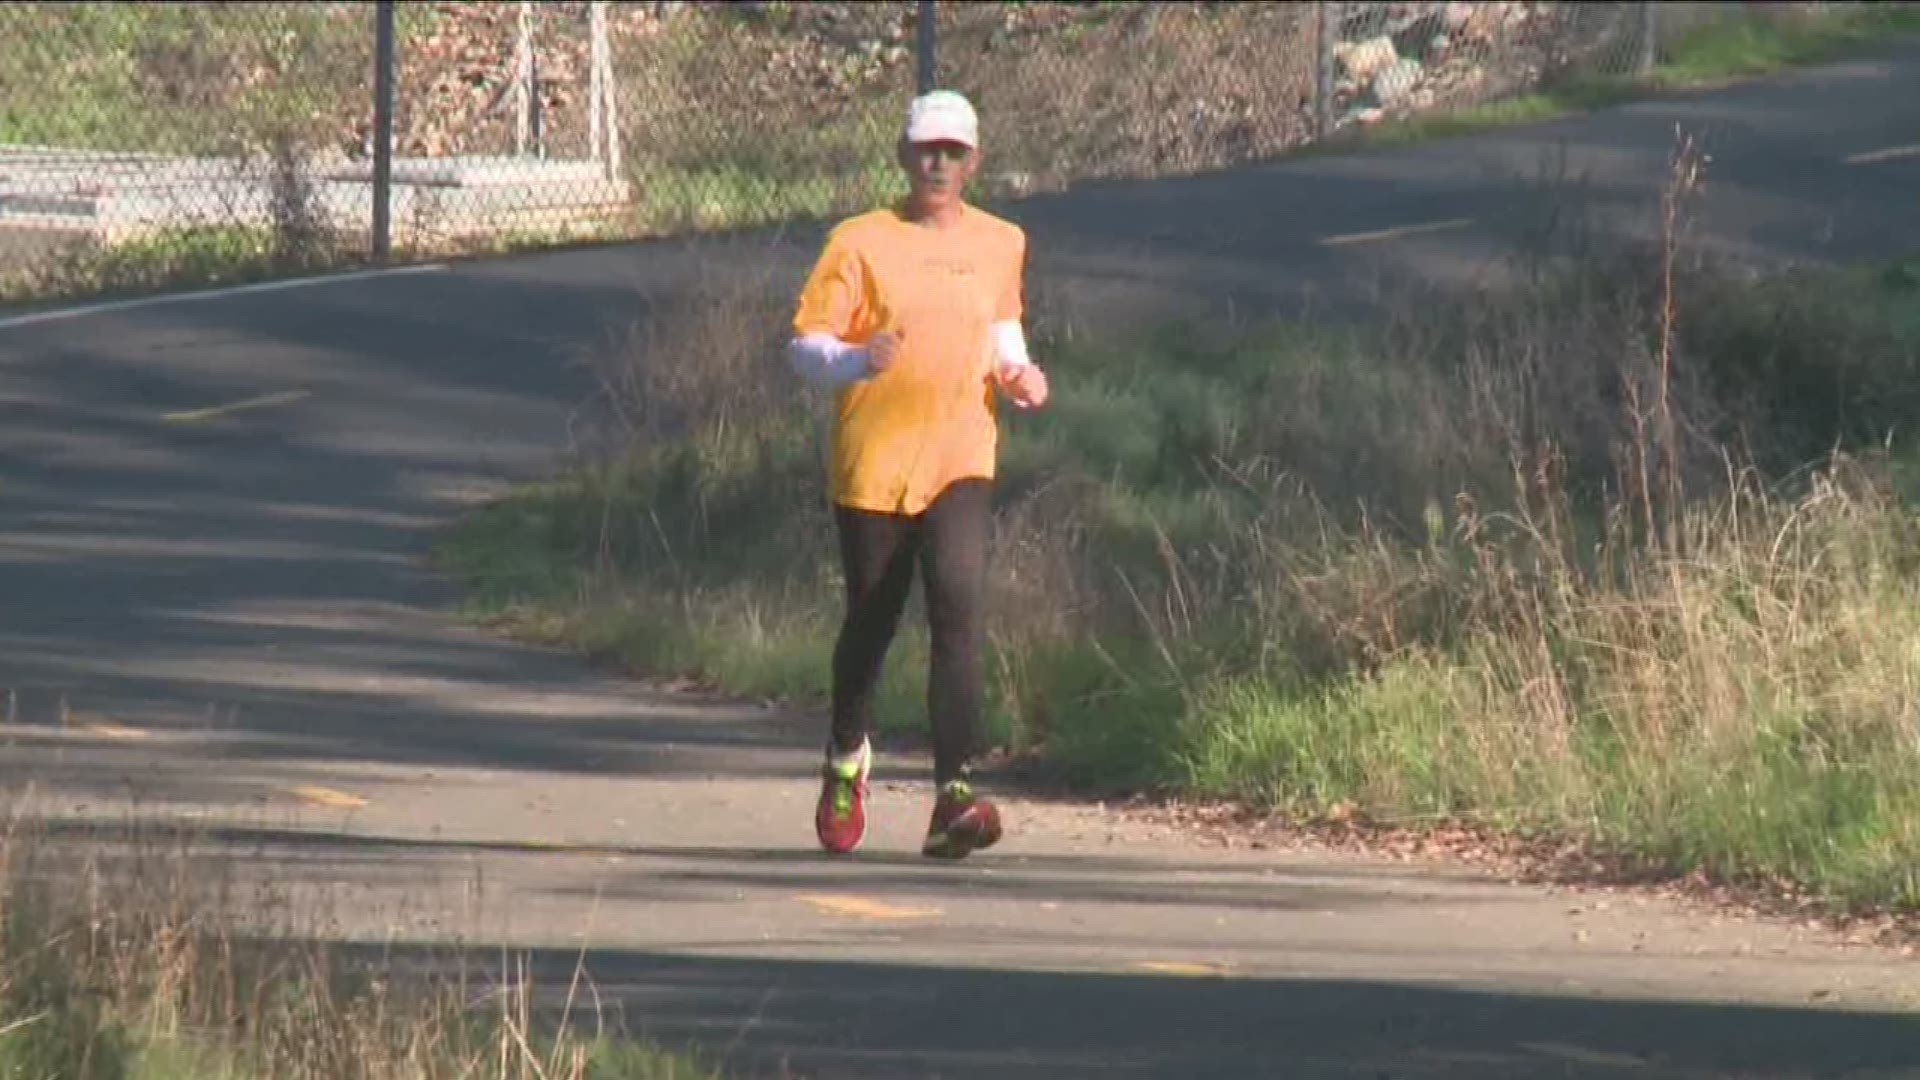 Dr. Larry Saltzman will be running this Sunday in the California International Marathon.  Despite battling two cancers, he continues to do what he loves while raising money for research.